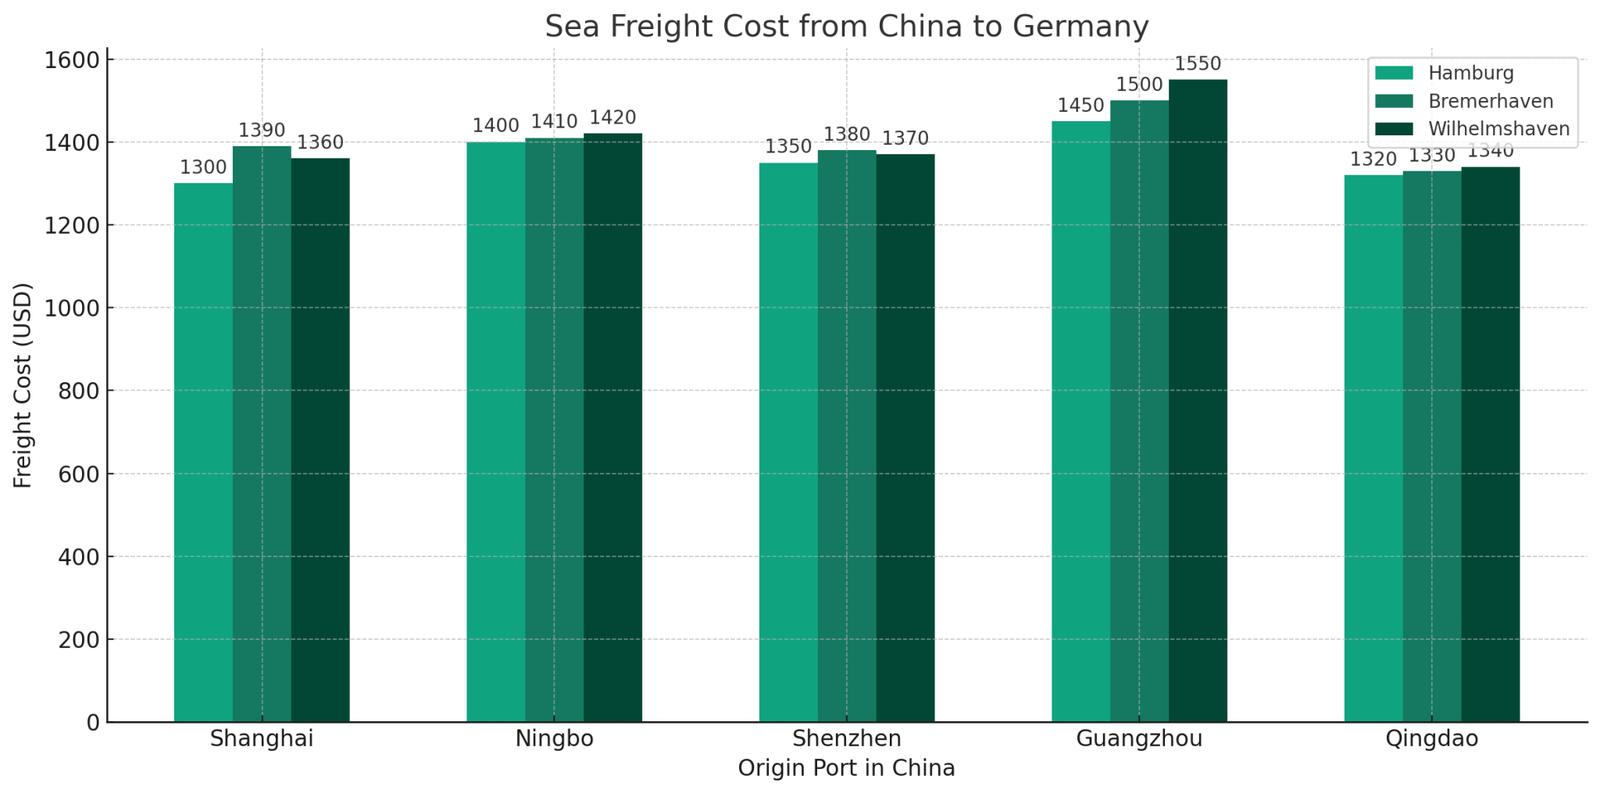 Sea freight cost from China to Germany